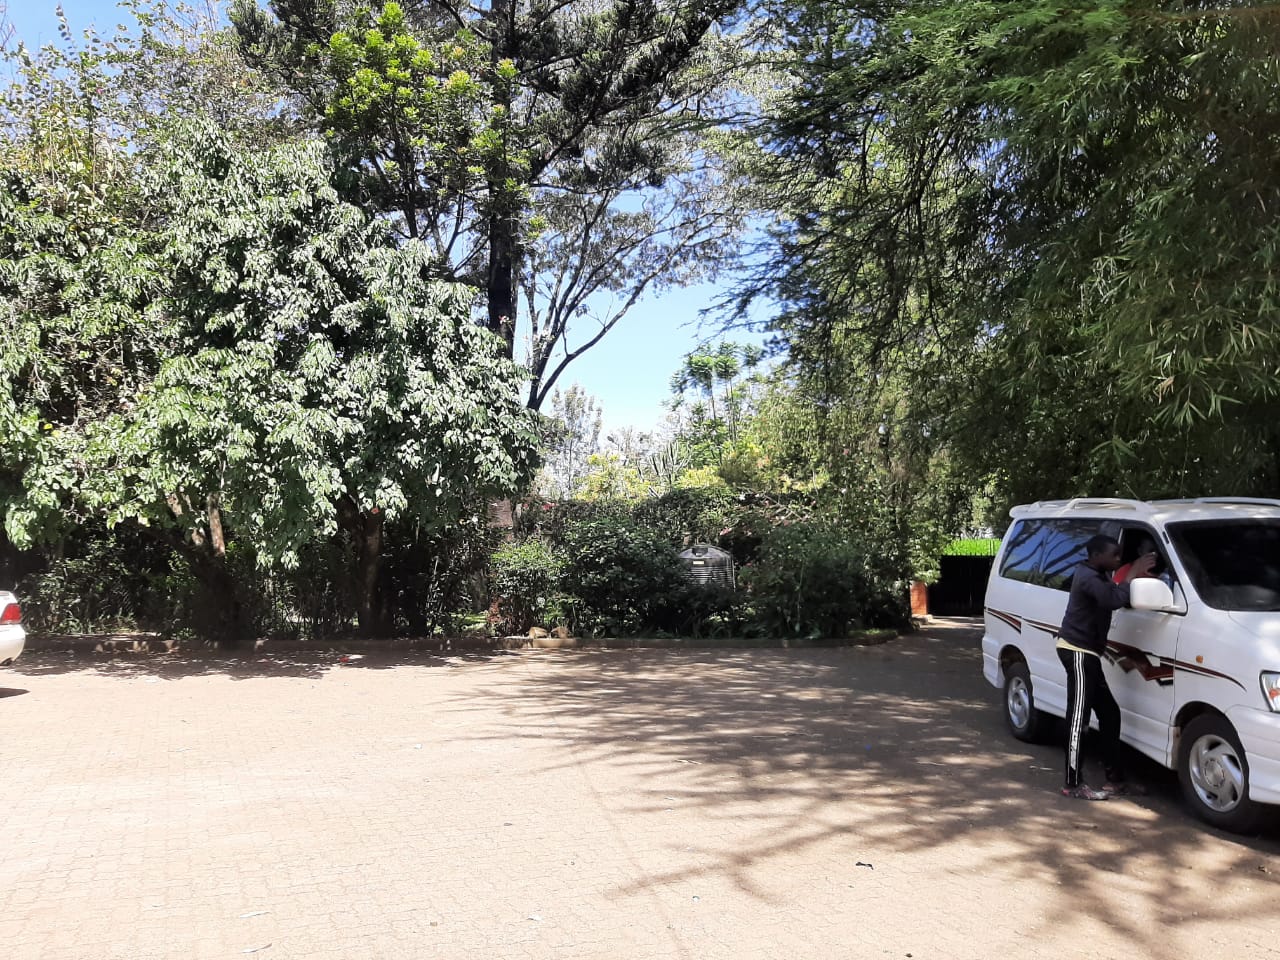 5 Bedrooms House to Let at Ksh300k sitting on 1:2 acre in Lavington with specious gardens and parkings7